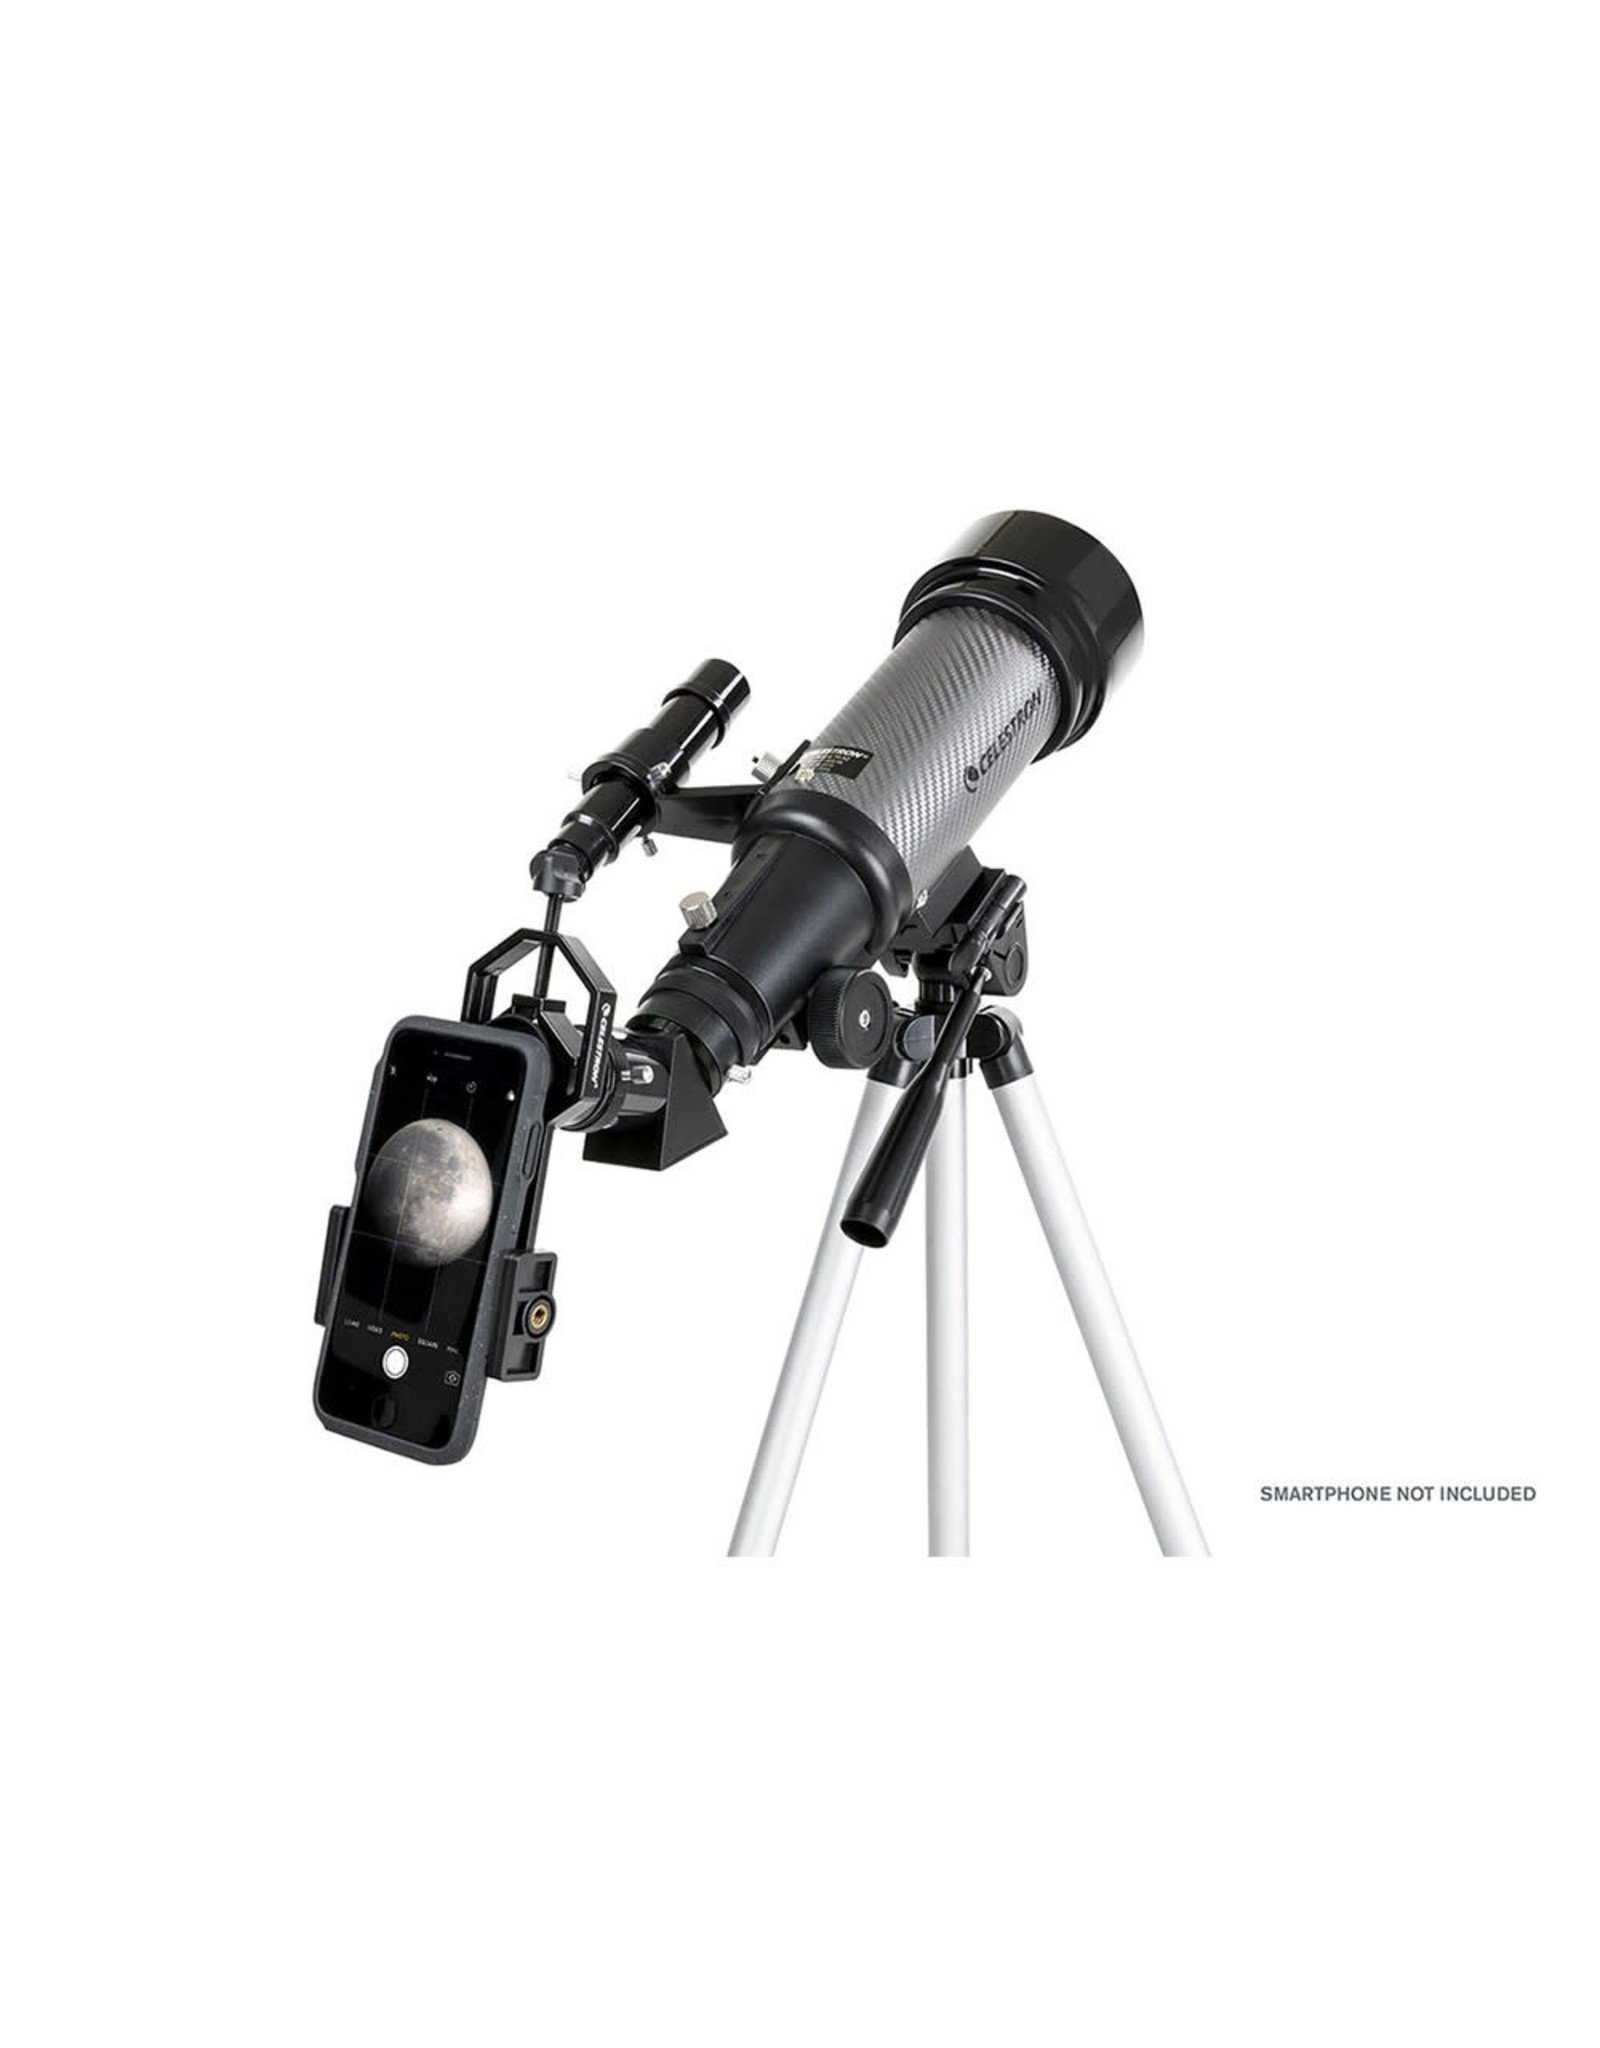 Celestron Travel Scope 70 DX with Backpack Camera